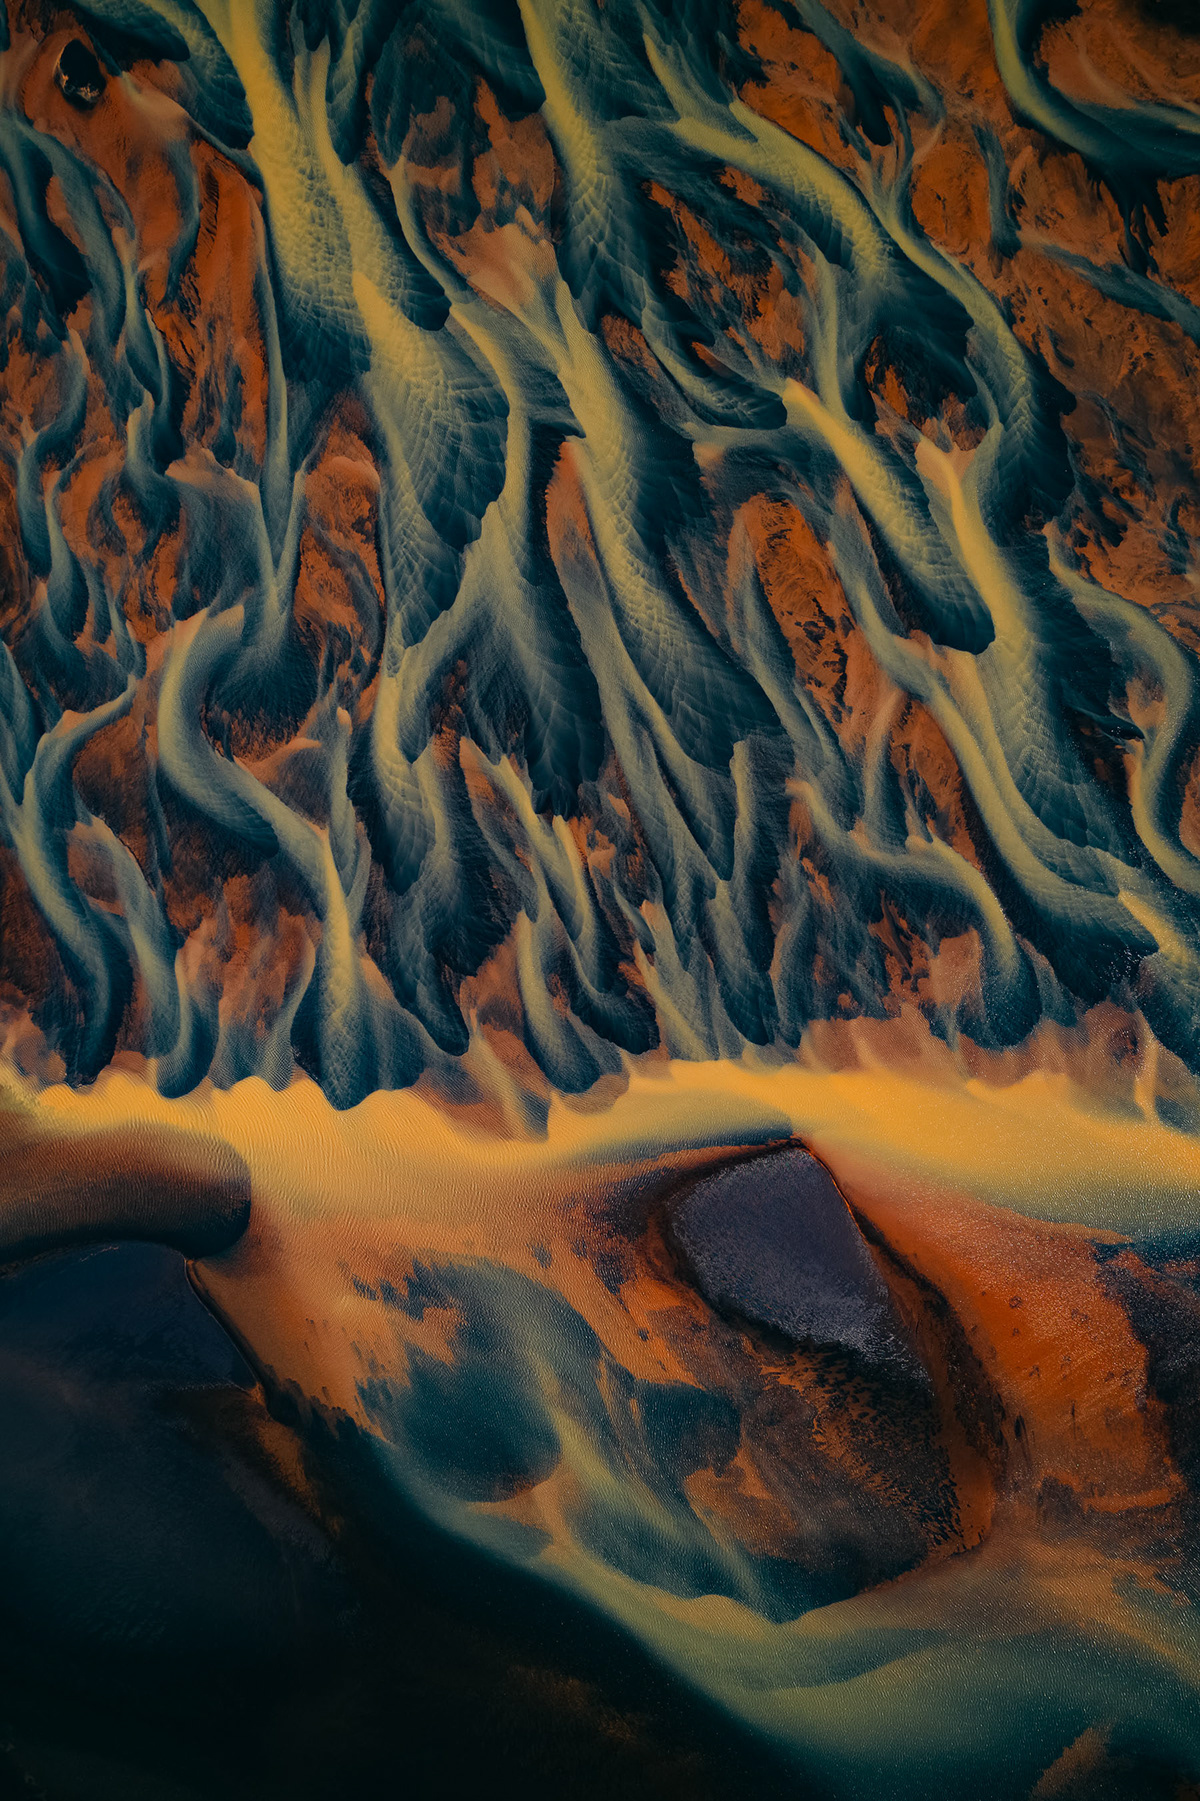 Glacier River River Veines iceland abstract Aerial Aerial Photography flow river water glacier